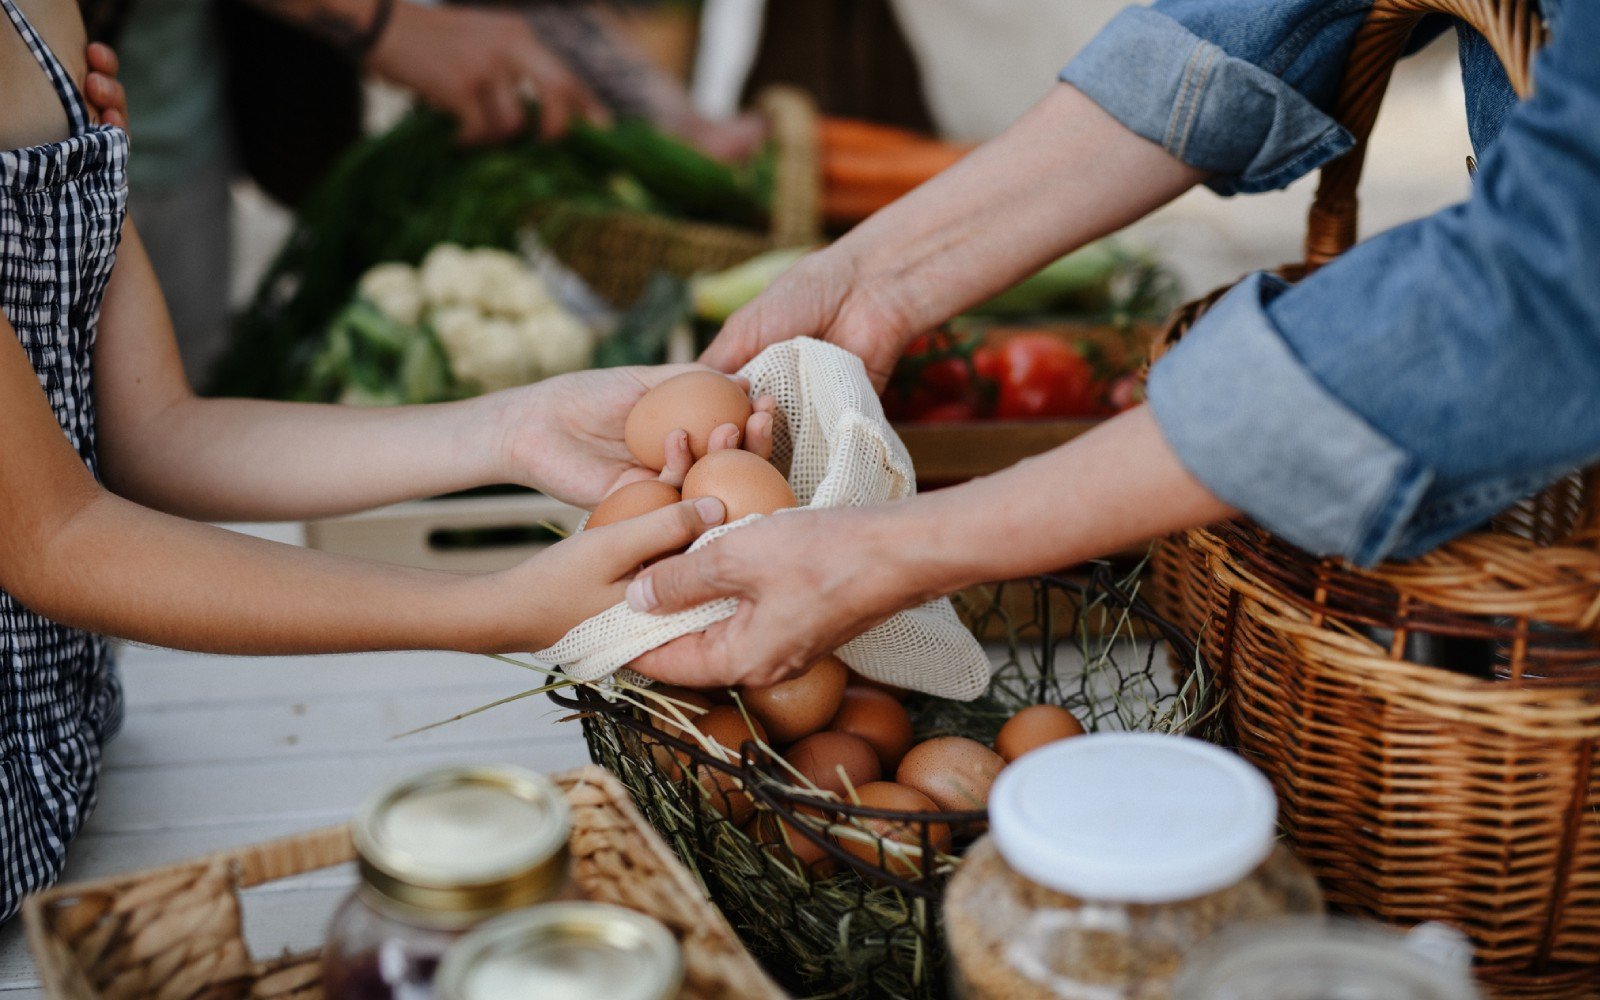 Farm to table: How to shop smarter at your local farmer's market